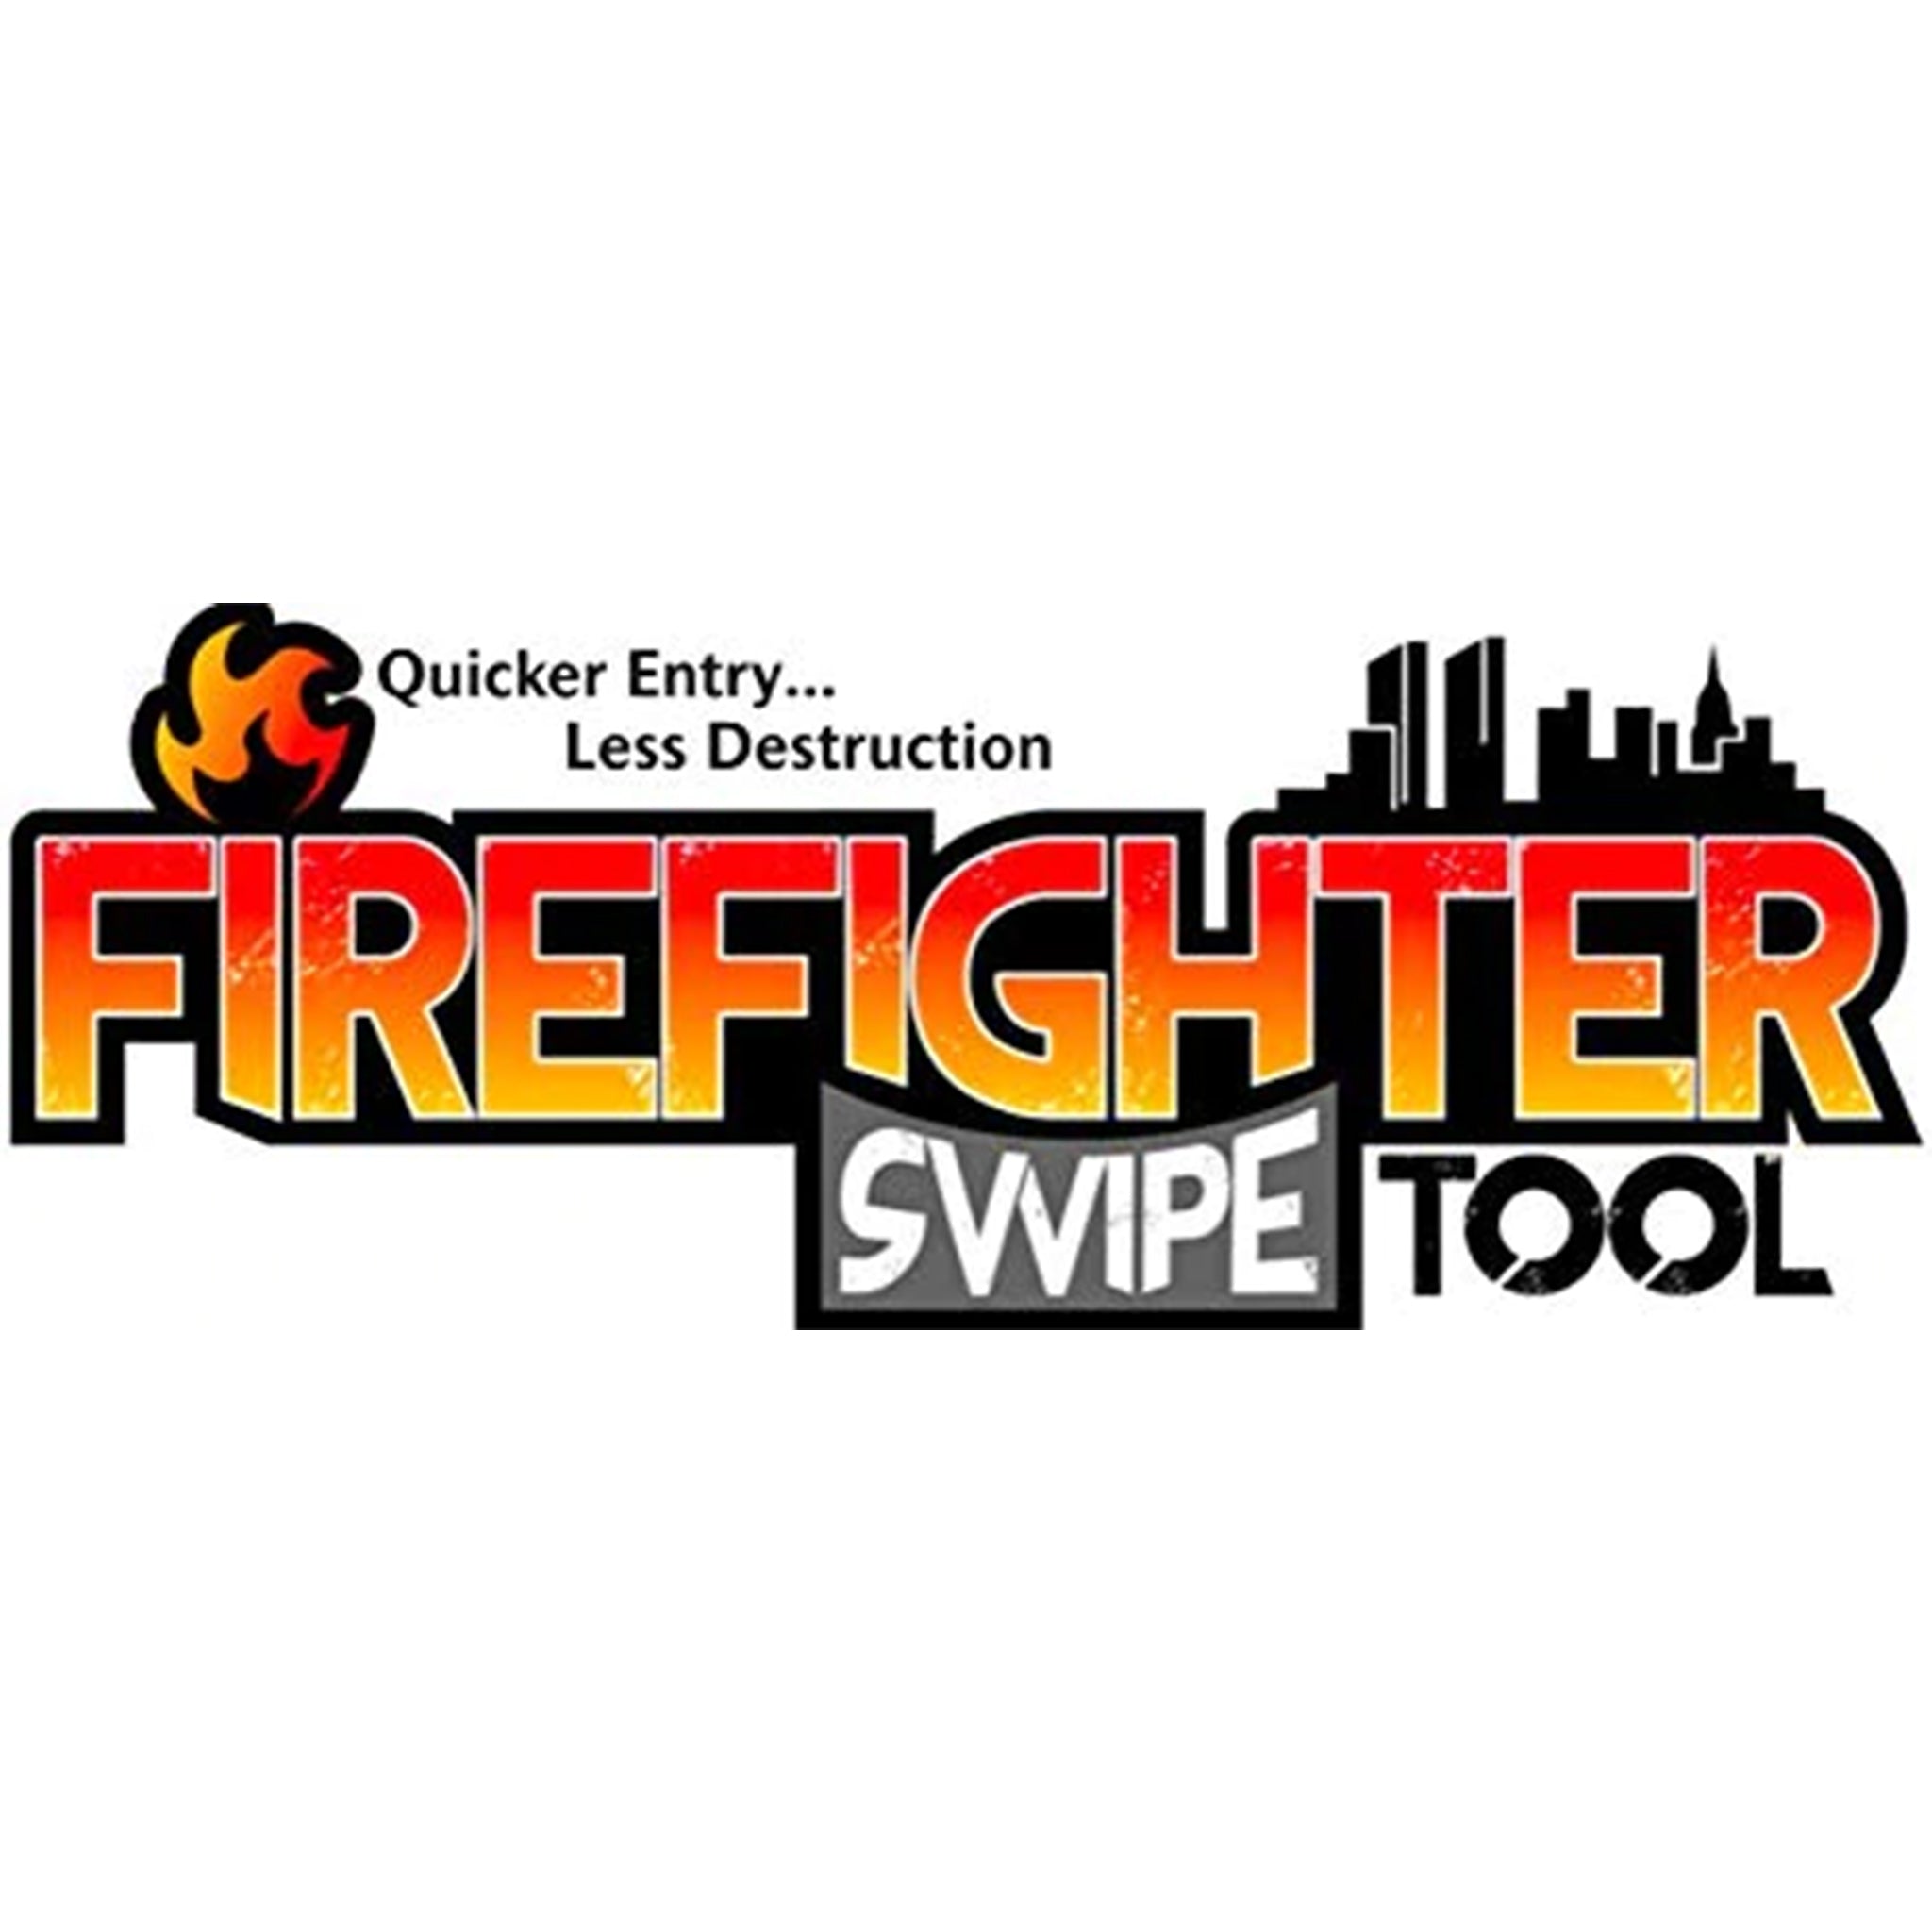 Firehouse/Station Pack of 20 Firefighter Swipe Tools